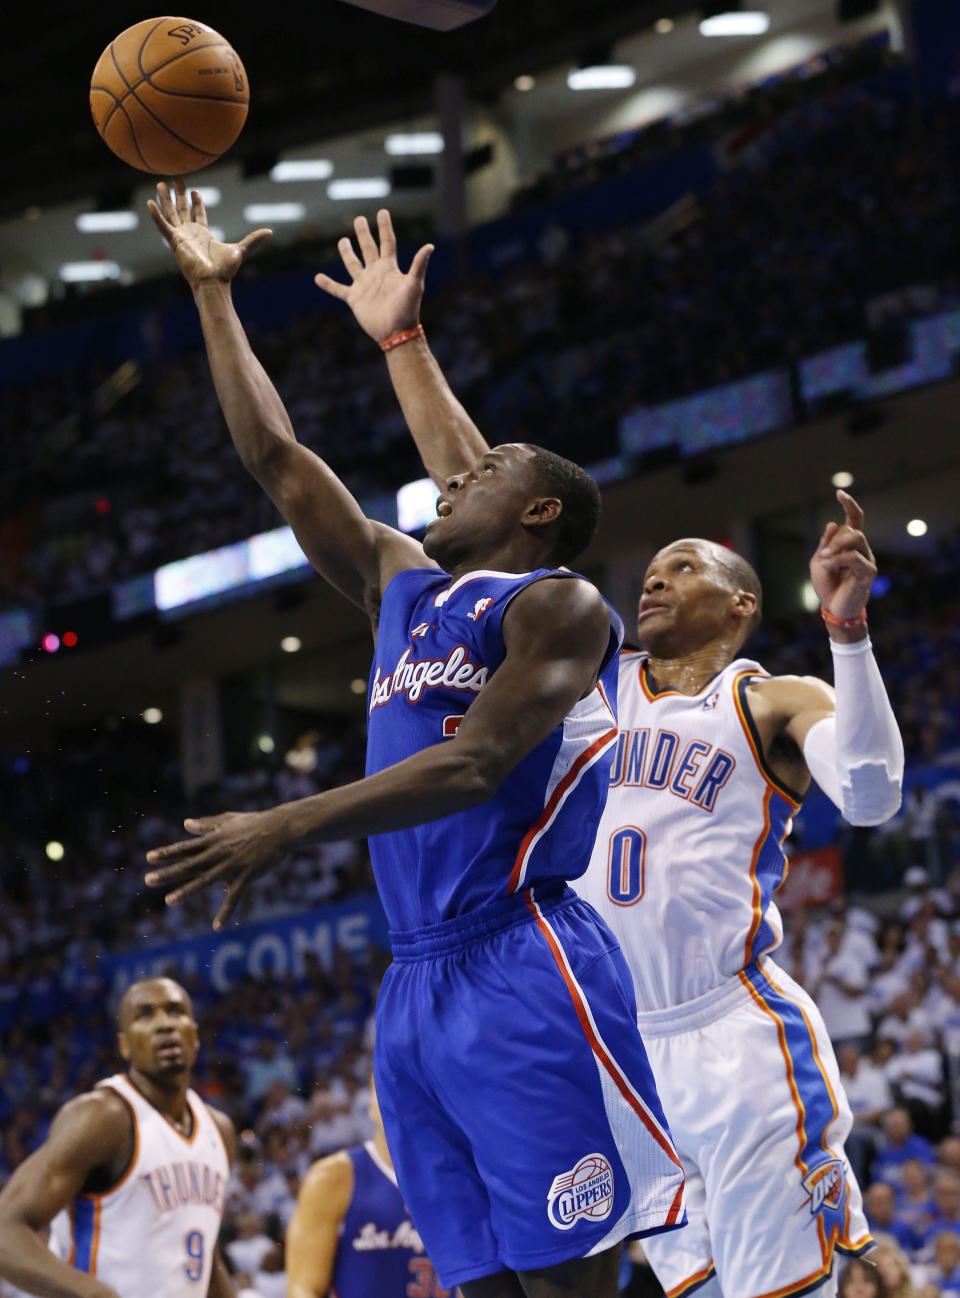 Los Angeles Clippers guard Darren Collison shoots in front of Oklahoma City Thunder guard Russell Westbrook (0) in the second quarter of Game 2 of the Western Conference semifinal NBA basketball playoff series in Oklahoma City, Wednesday, May 7, 2014. (AP Photo/Sue Ogrocki)